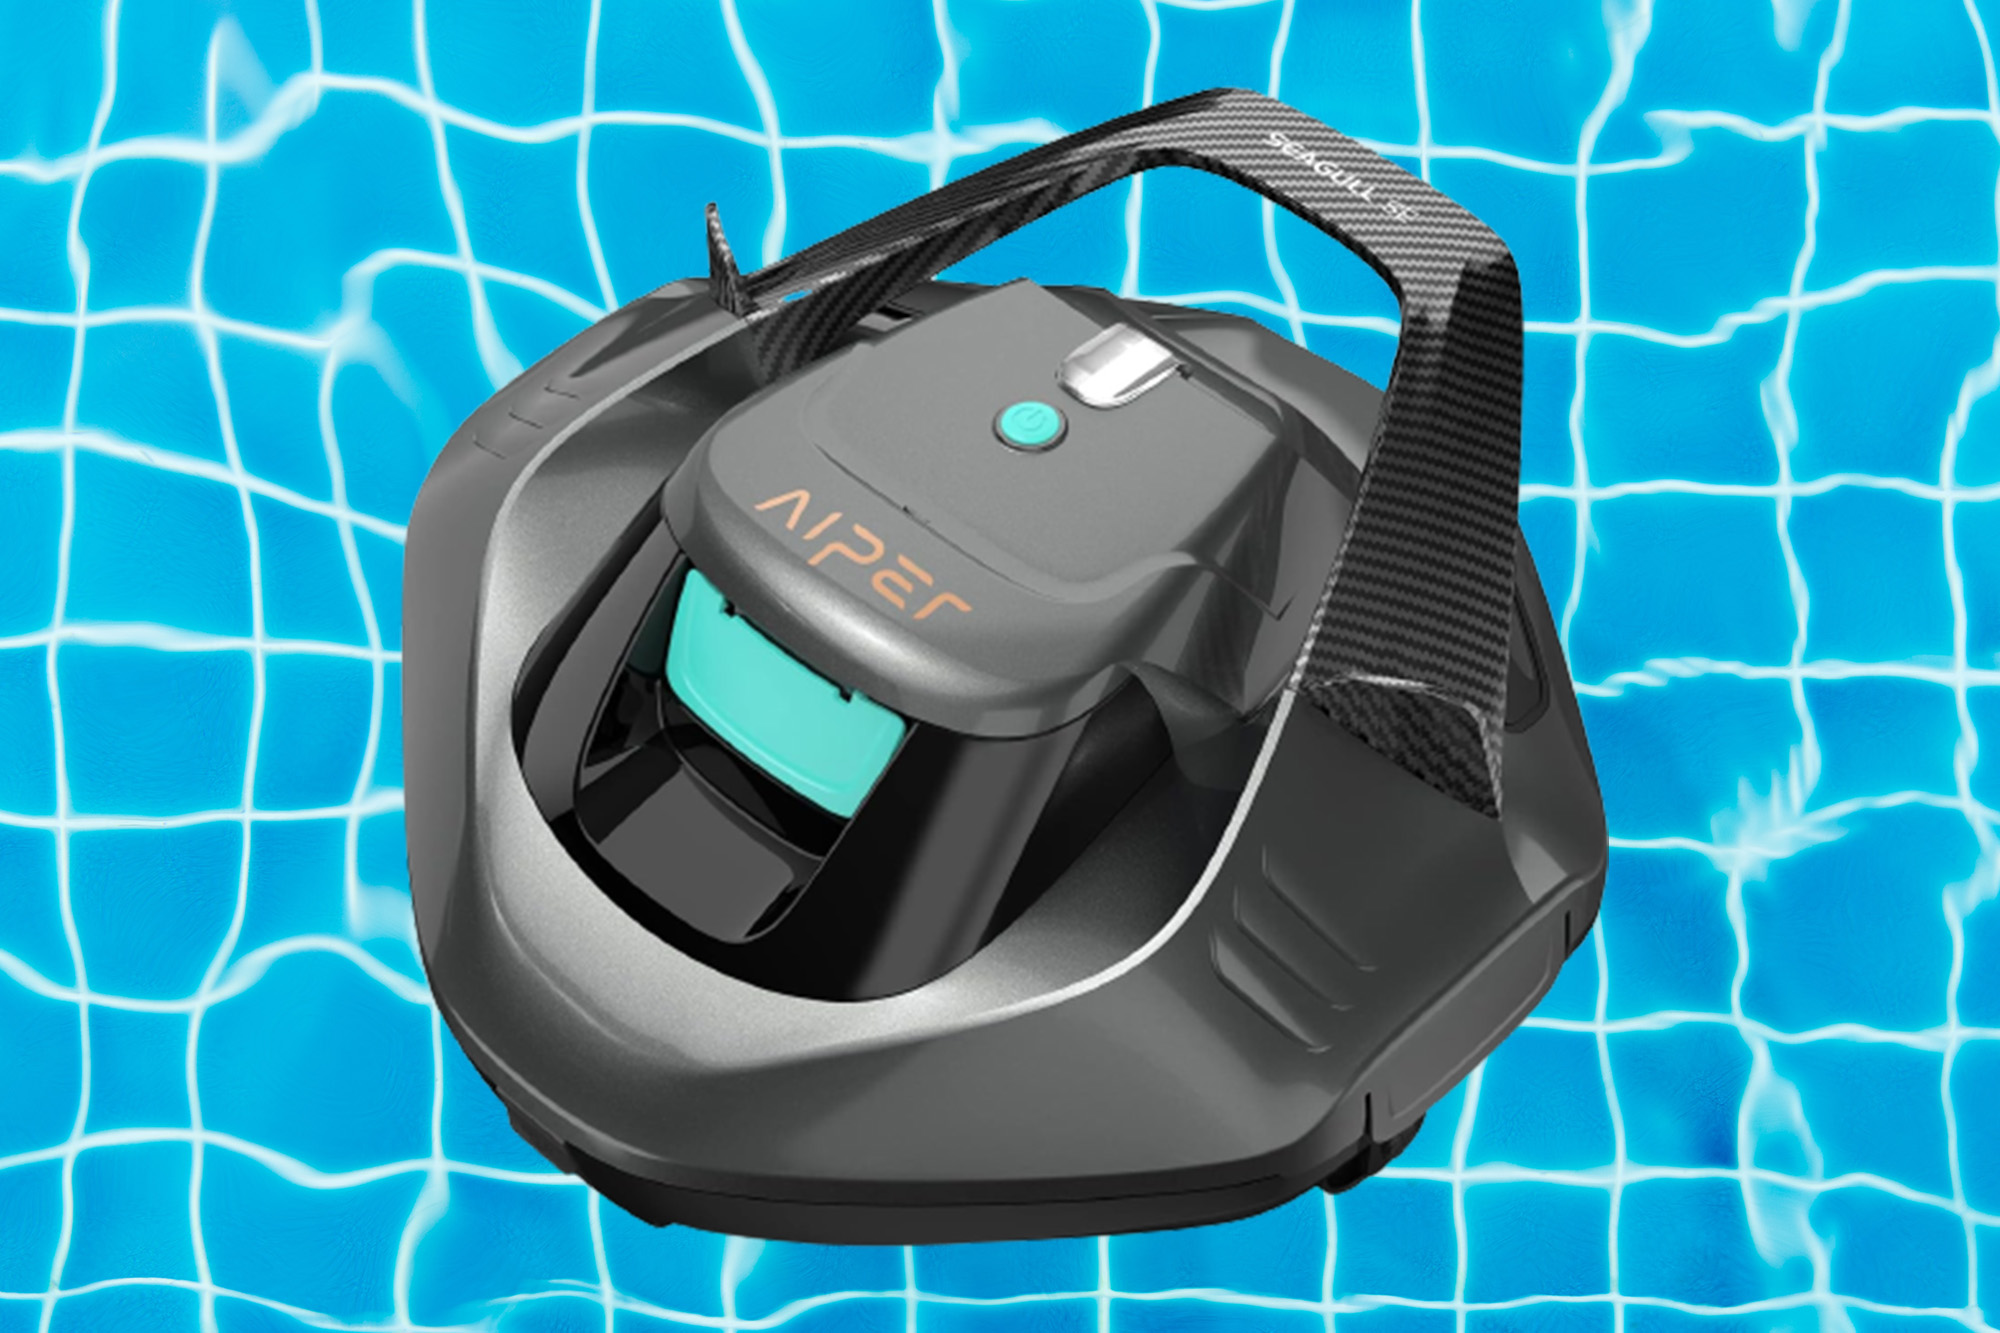 Snag this AIPER robotic pool cleaner that is $100 off on Amazon